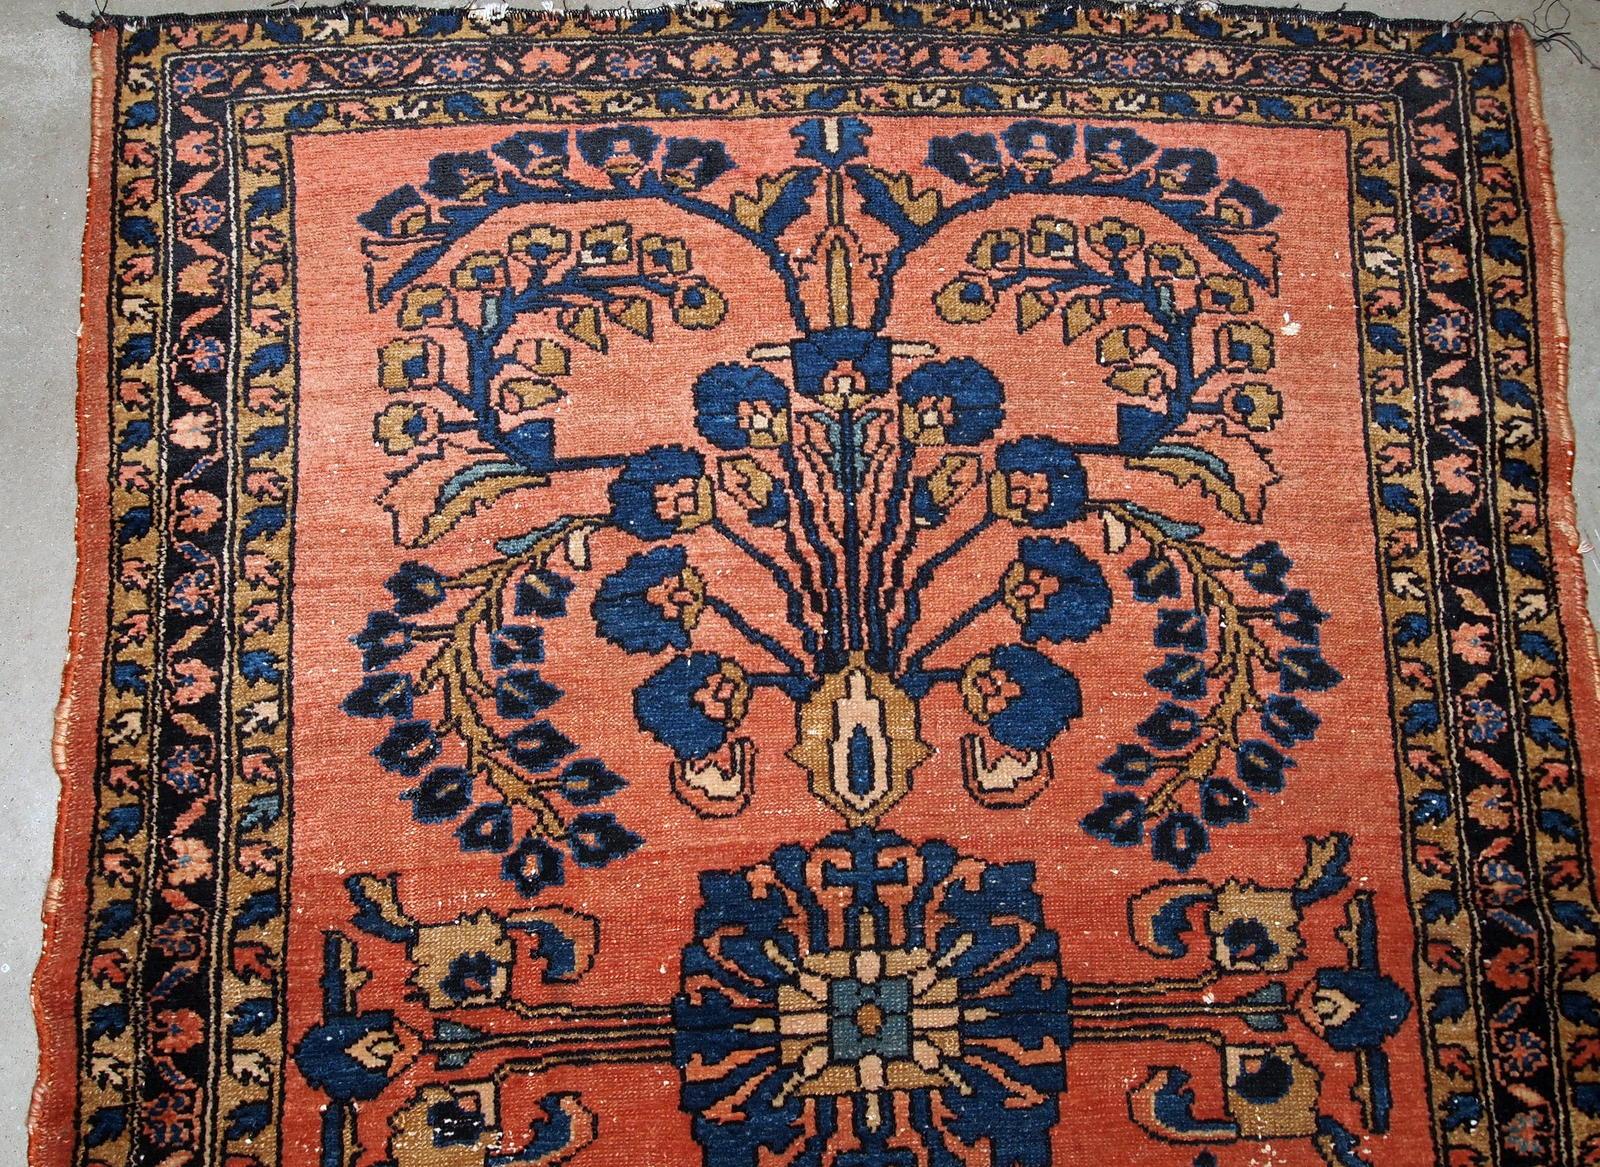 Handmade antique Lilihan style rug in red color. The rug is from the beginning of 20th century in original condition, the end are missing and it has some low pile.

-Condition: original, the ends are missing, some low pile,

-circa